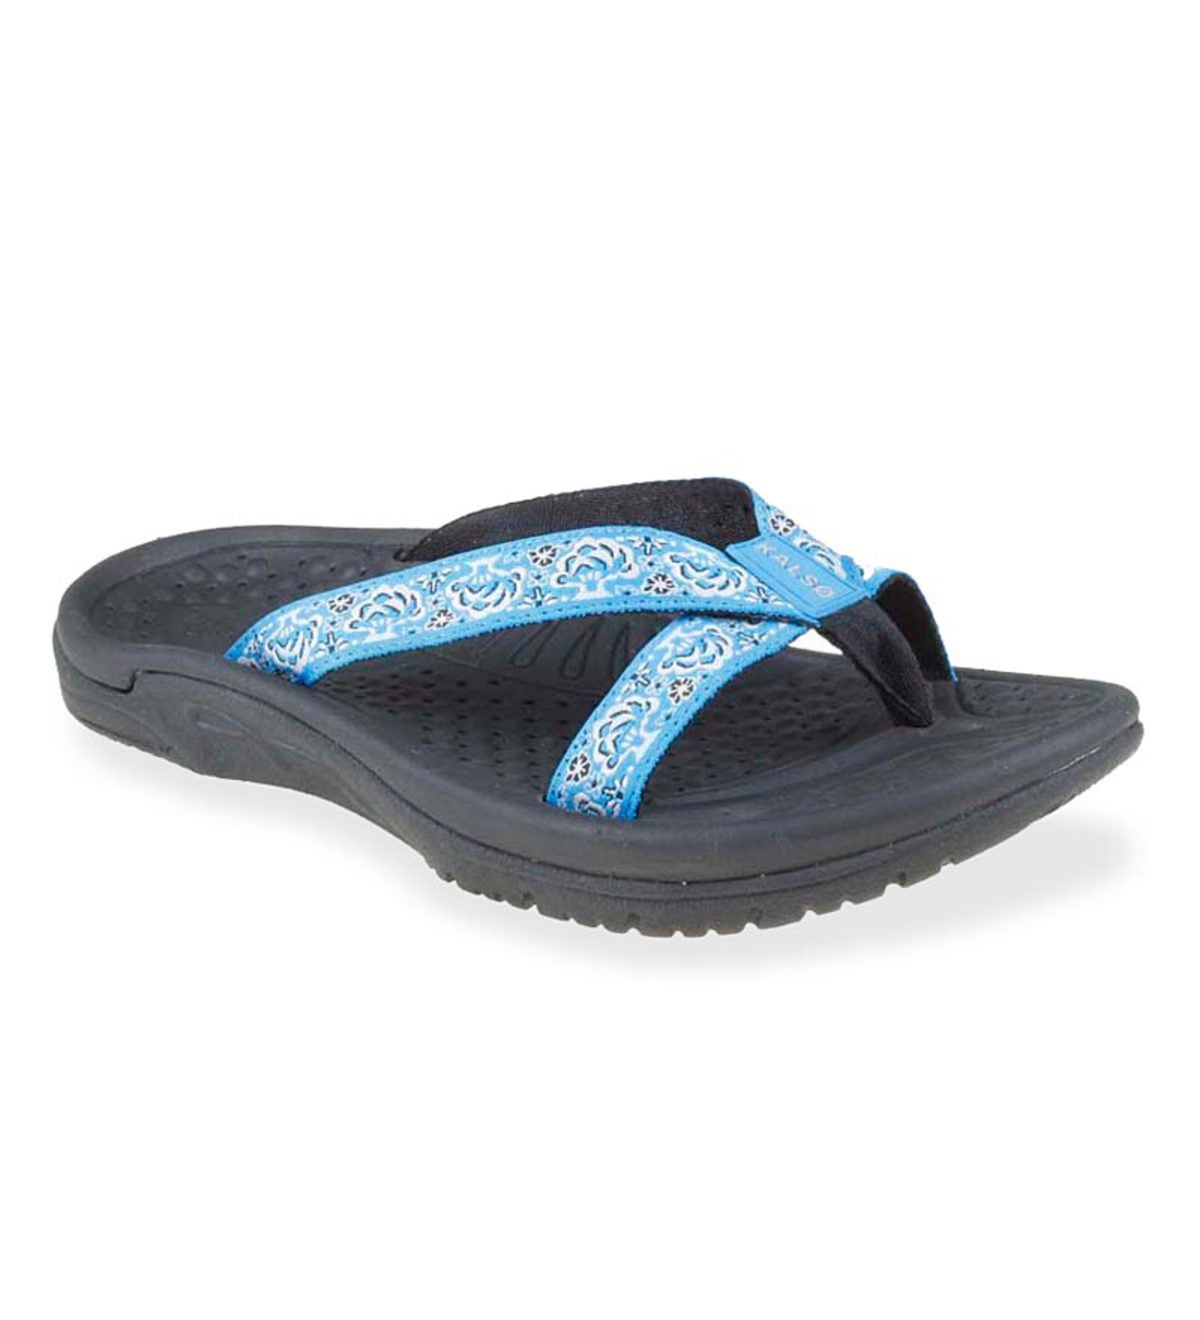 Kalso Earth® Women's Cabo San Lucas Thong Sandals - Baltic Blue - Size ...